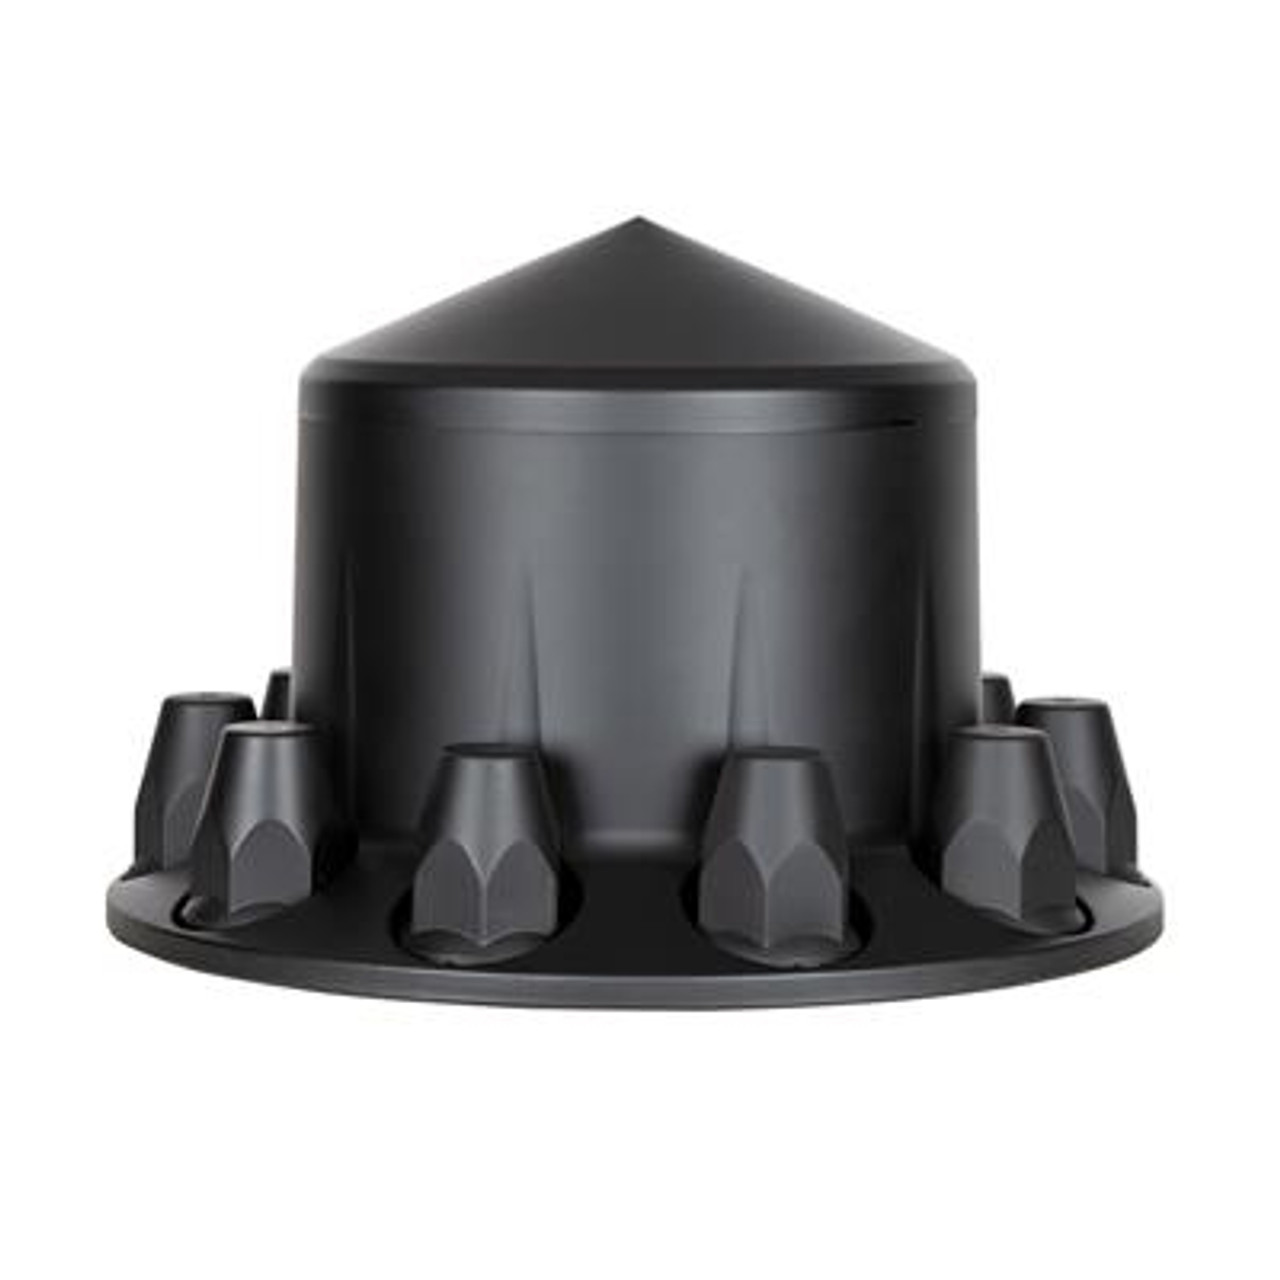 Pointed Rear Axle Cover With 33mm Standard Thread-On Nut Cover - Matte Black